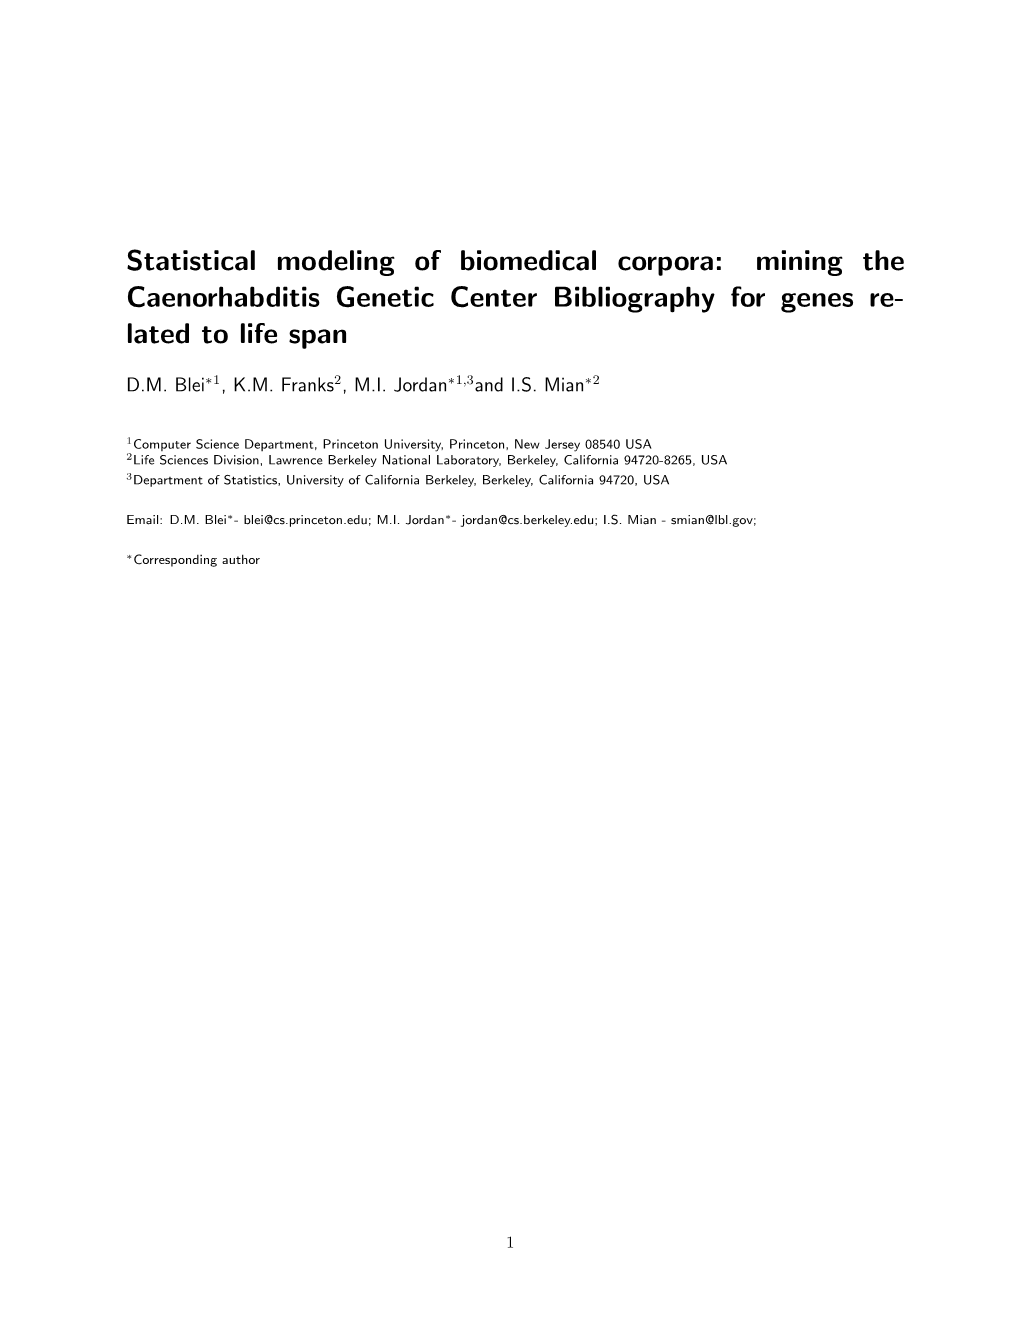 Statistical Modeling of Biomedical Corpora: Mining the Caenorhabditis Genetic Center Bibliography for Genes Re- Lated to Life Span